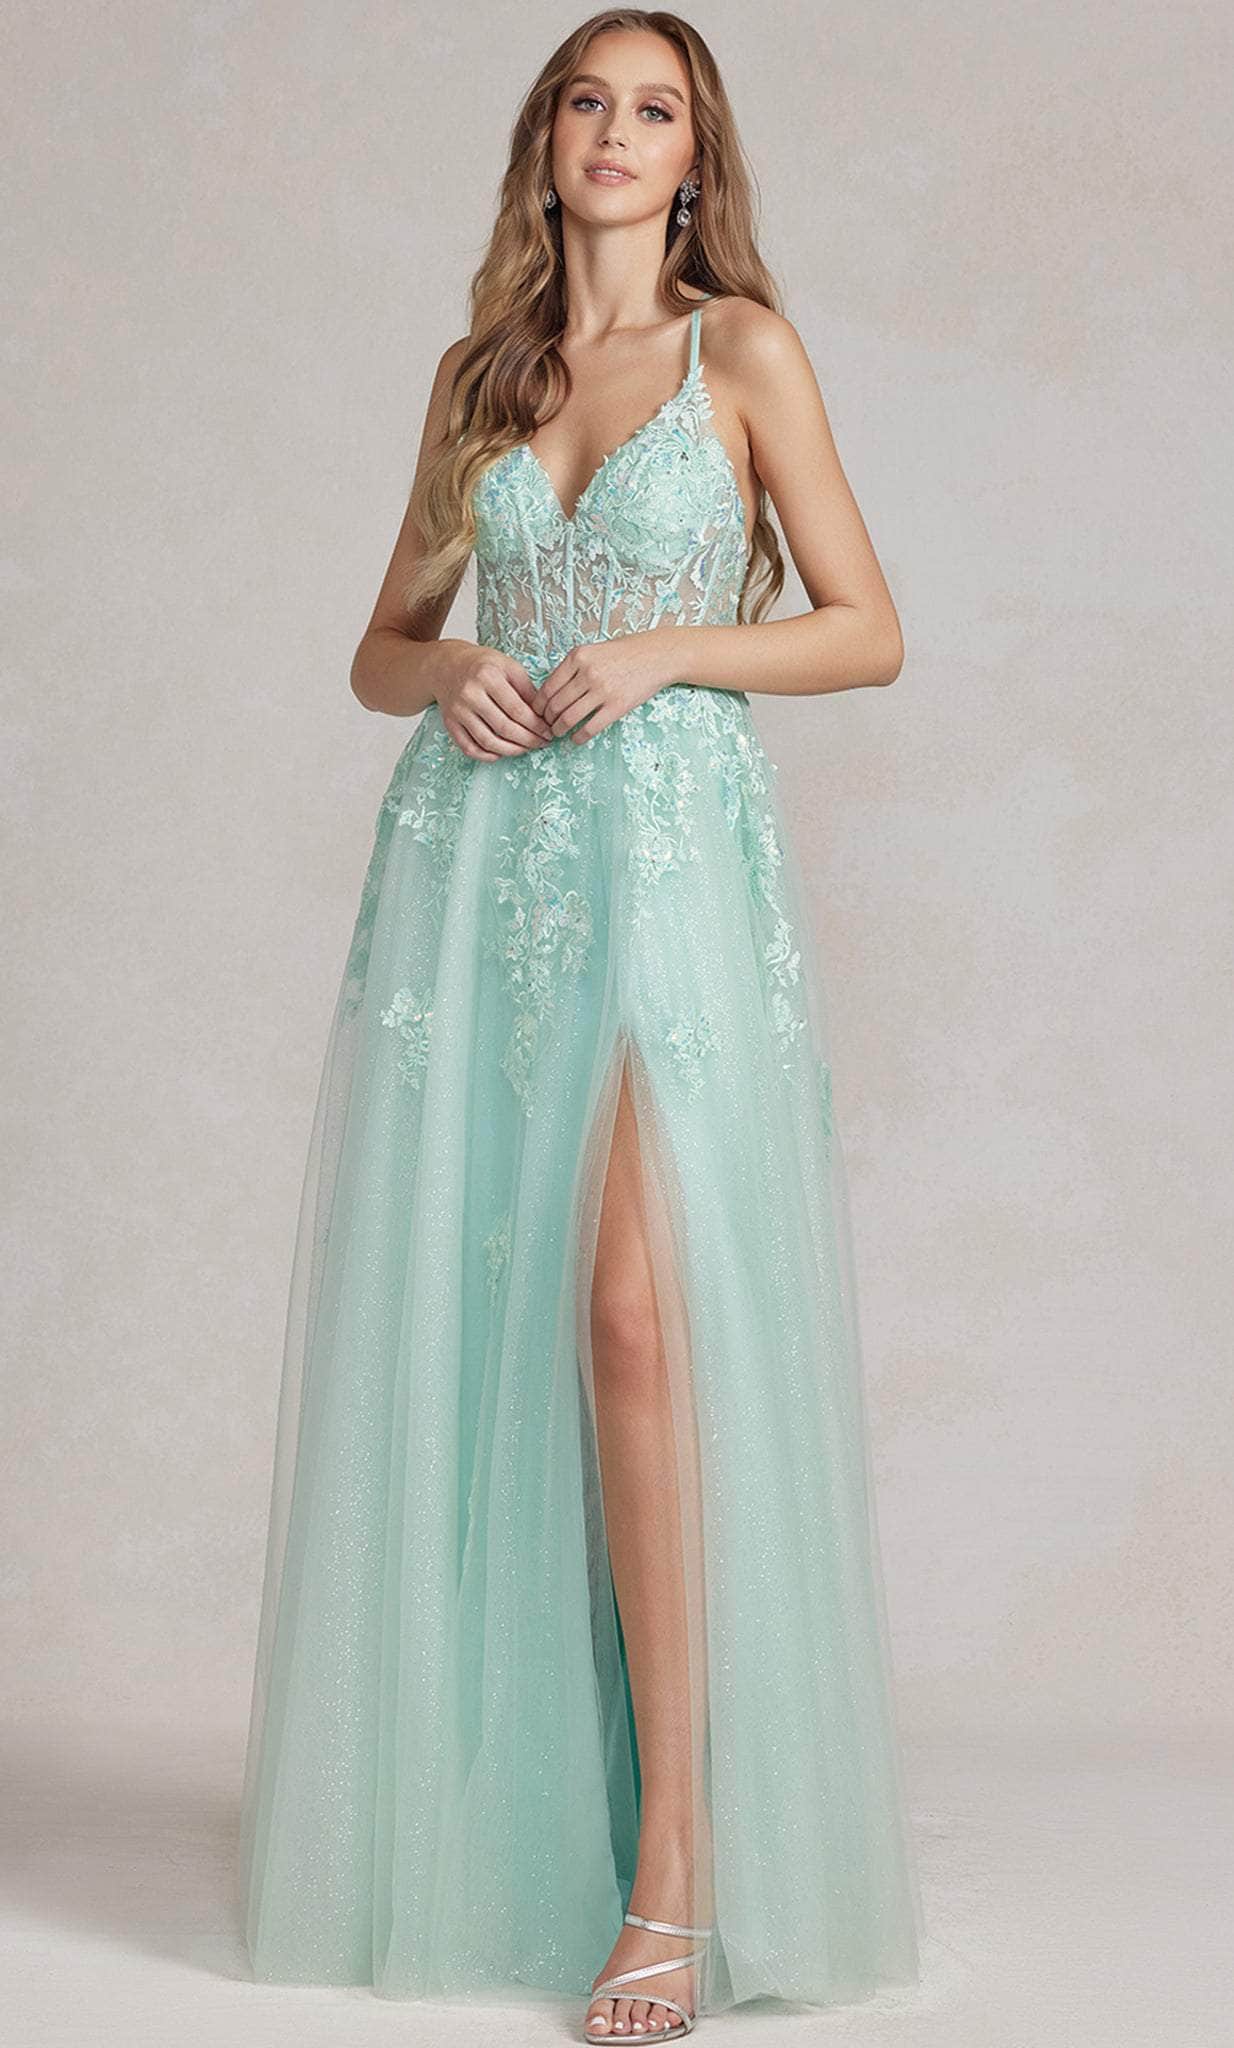 Image of Nox Anabel T1081 - Sleeveless Lace Embroidered Prom Dress